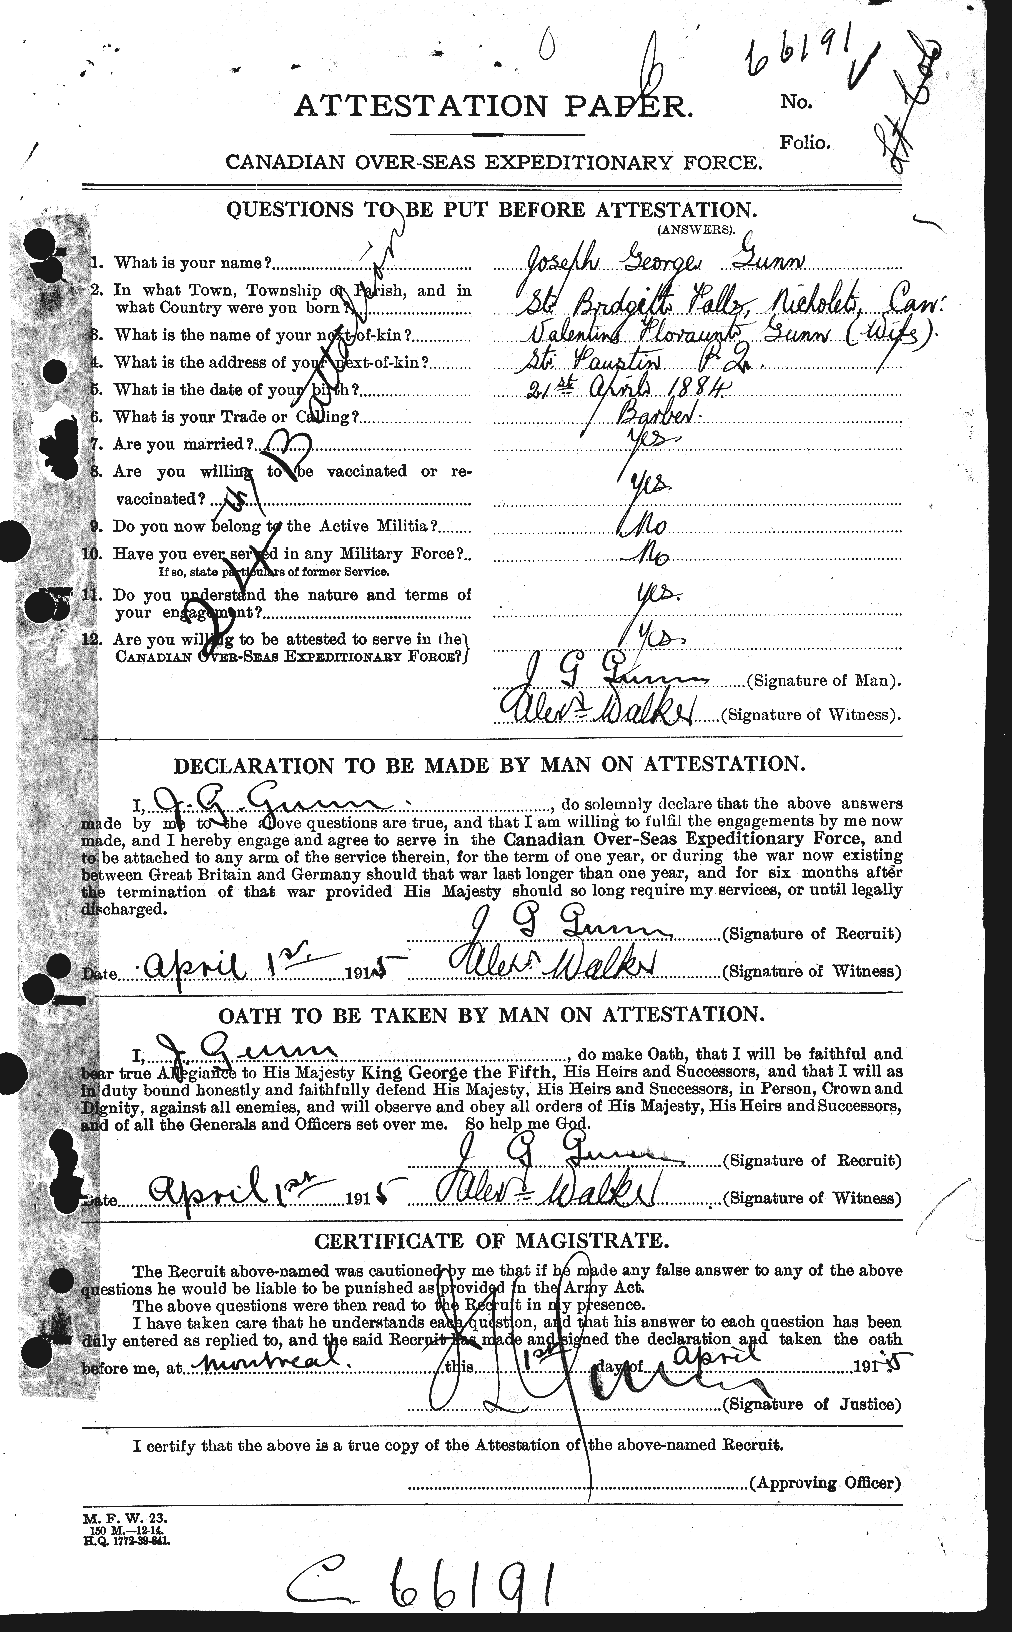 Personnel Records of the First World War - CEF 369309a